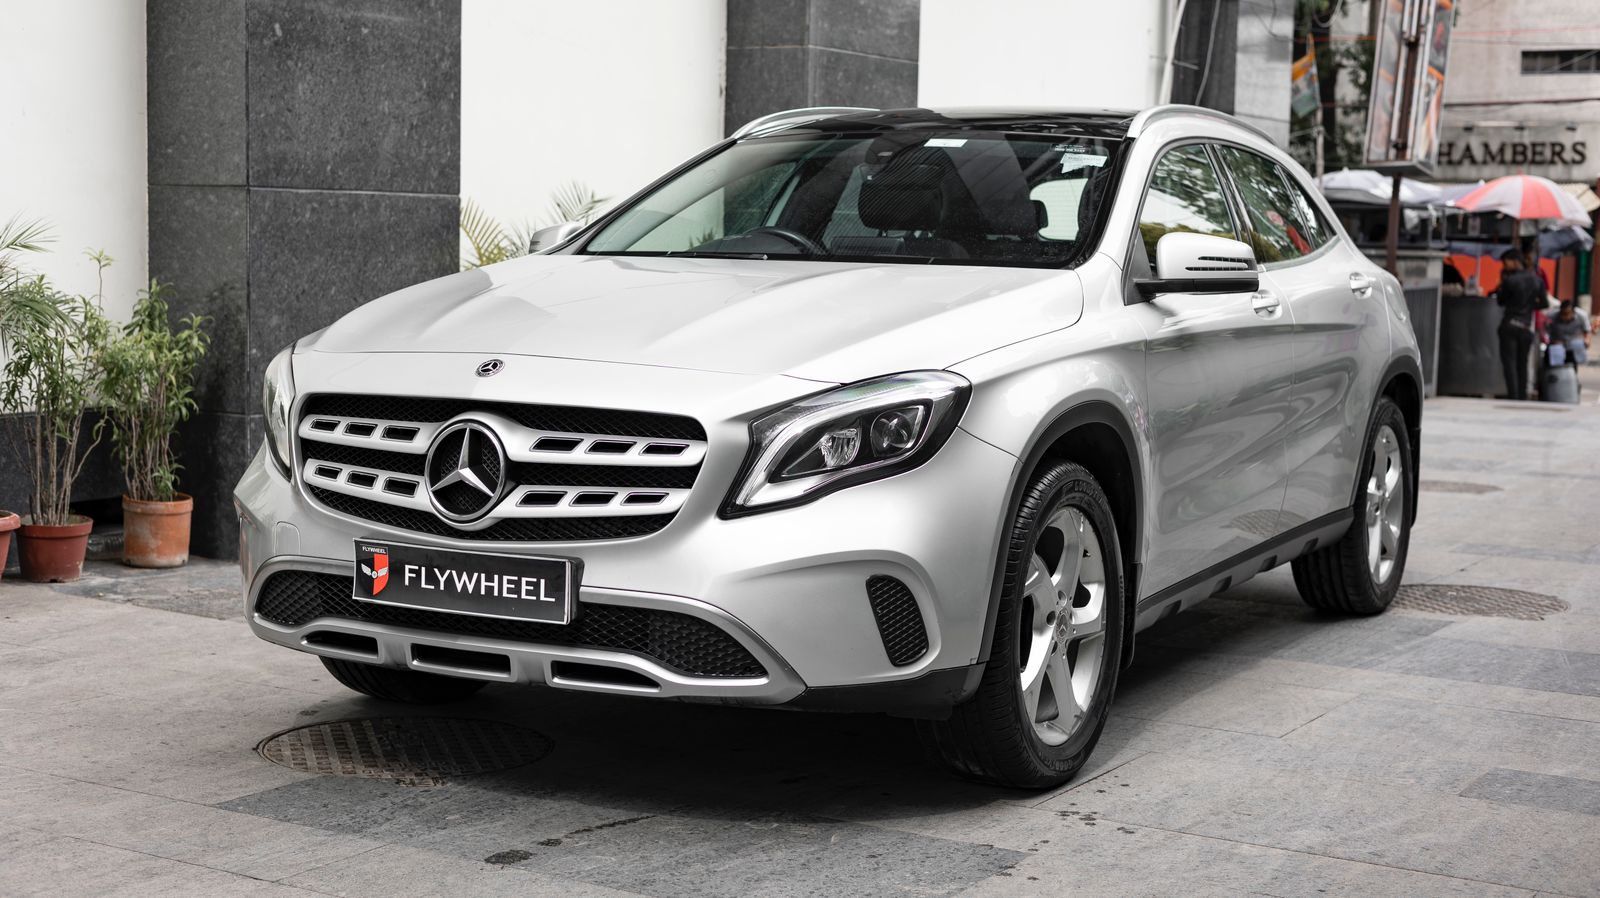 The Mercedes Benz GLA 200D: Where Luxury Meets Power